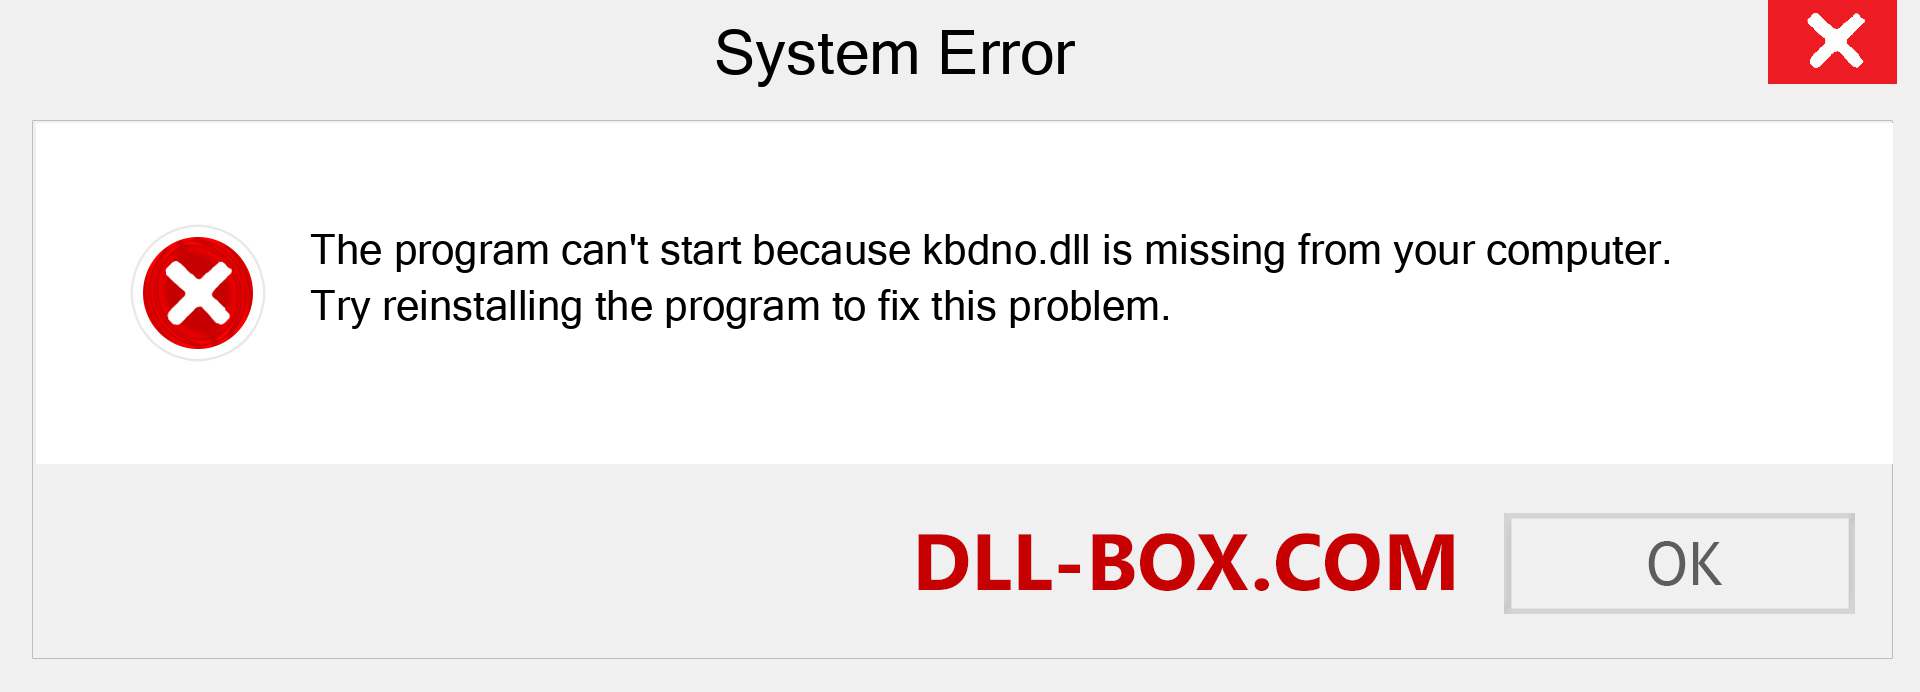  kbdno.dll file is missing?. Download for Windows 7, 8, 10 - Fix  kbdno dll Missing Error on Windows, photos, images